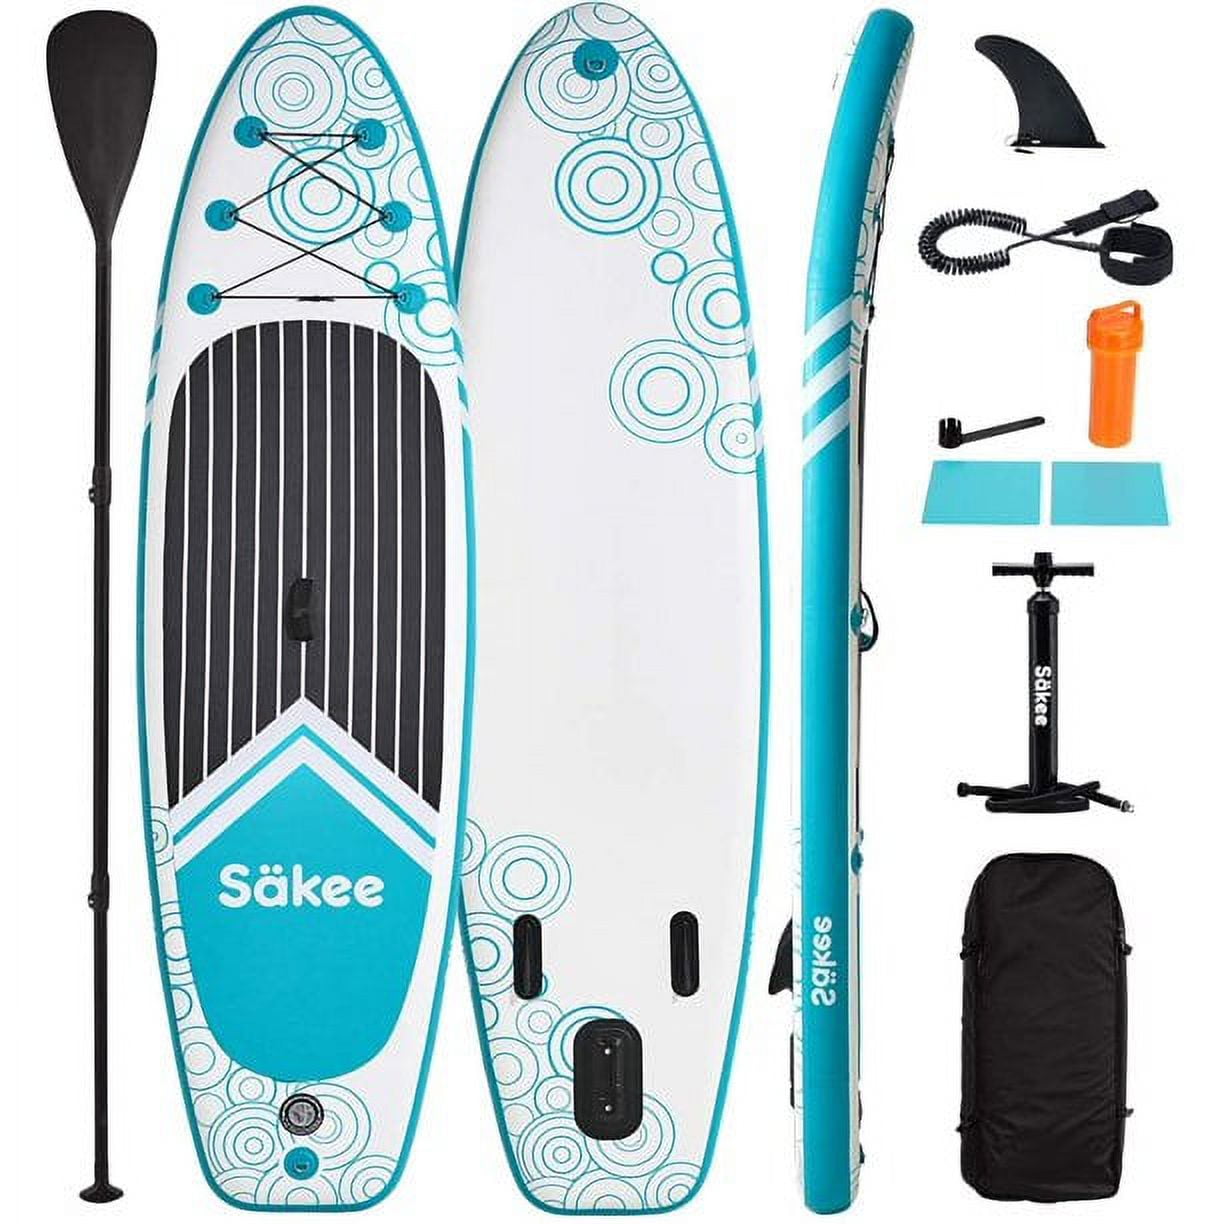 SÄKEE 10FT Inflatable Stand Up Paddle Board with Premium SUP Accessories,  Fit for Youth & Adult Paddleboard